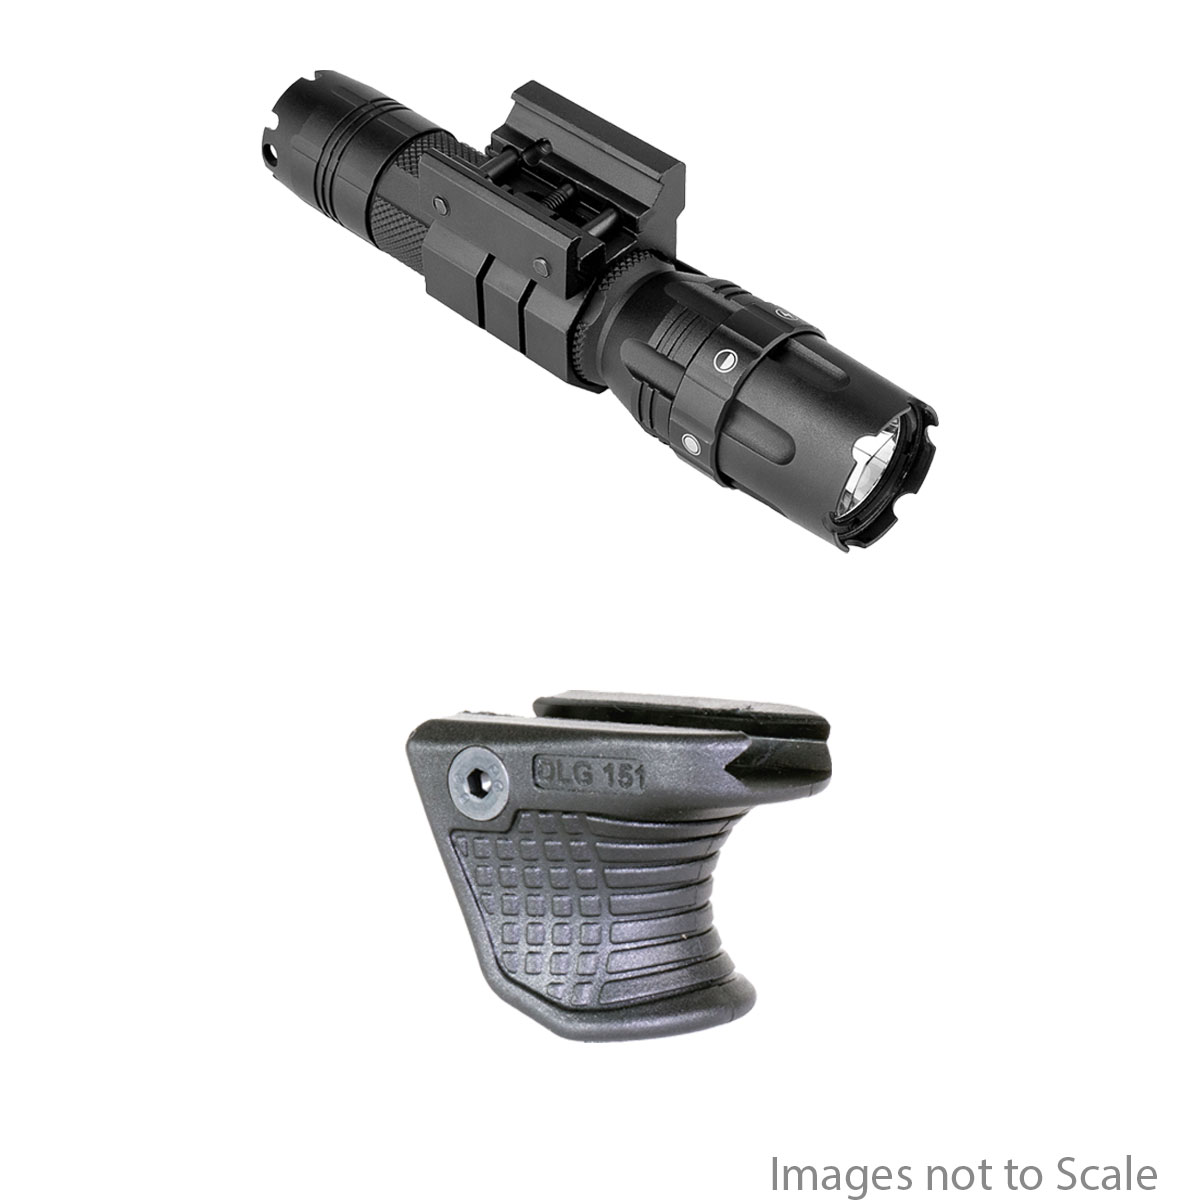 Accessorize Your Build: VISM Pro Series Mod 2 Flashlight w/ Rail Mount + NcSTAR Black Picatinny Hand Stop with QD Sling Base